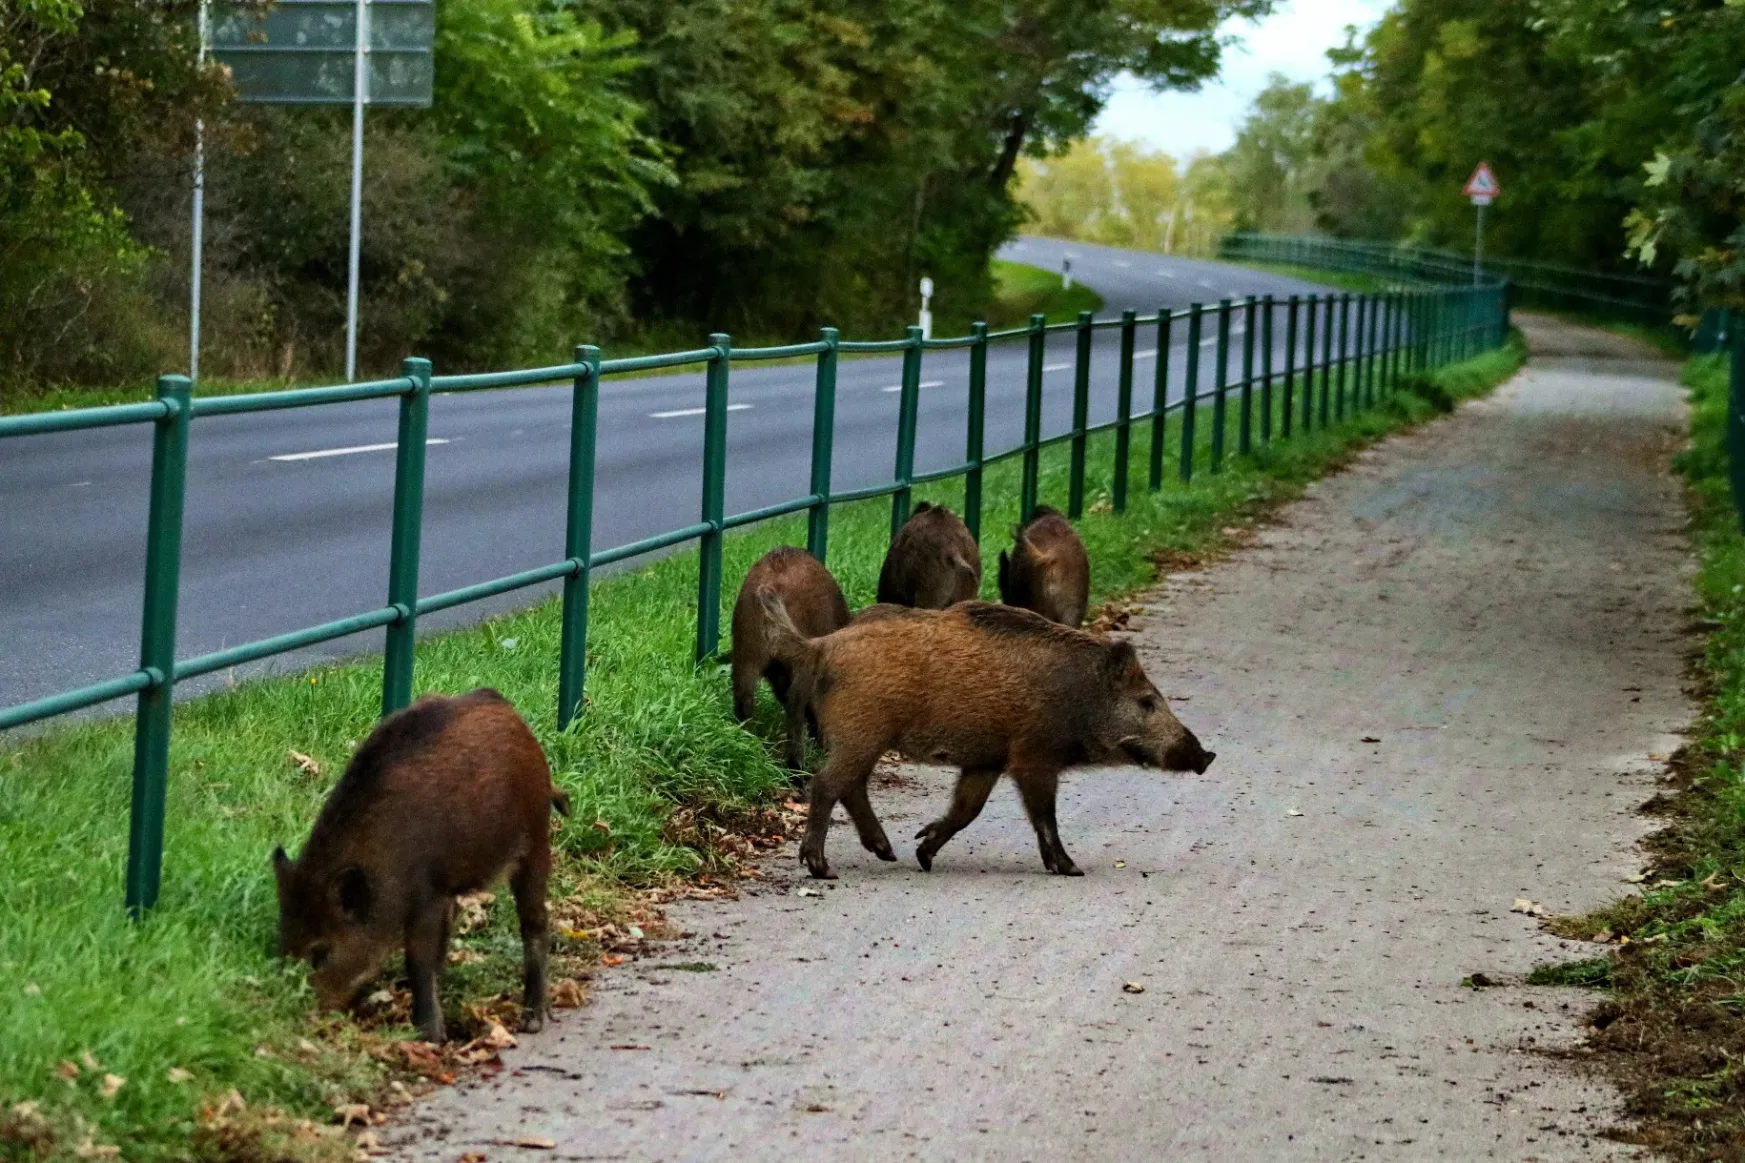 Urban wild boars – a problem some Hungarian towns are trying to solve